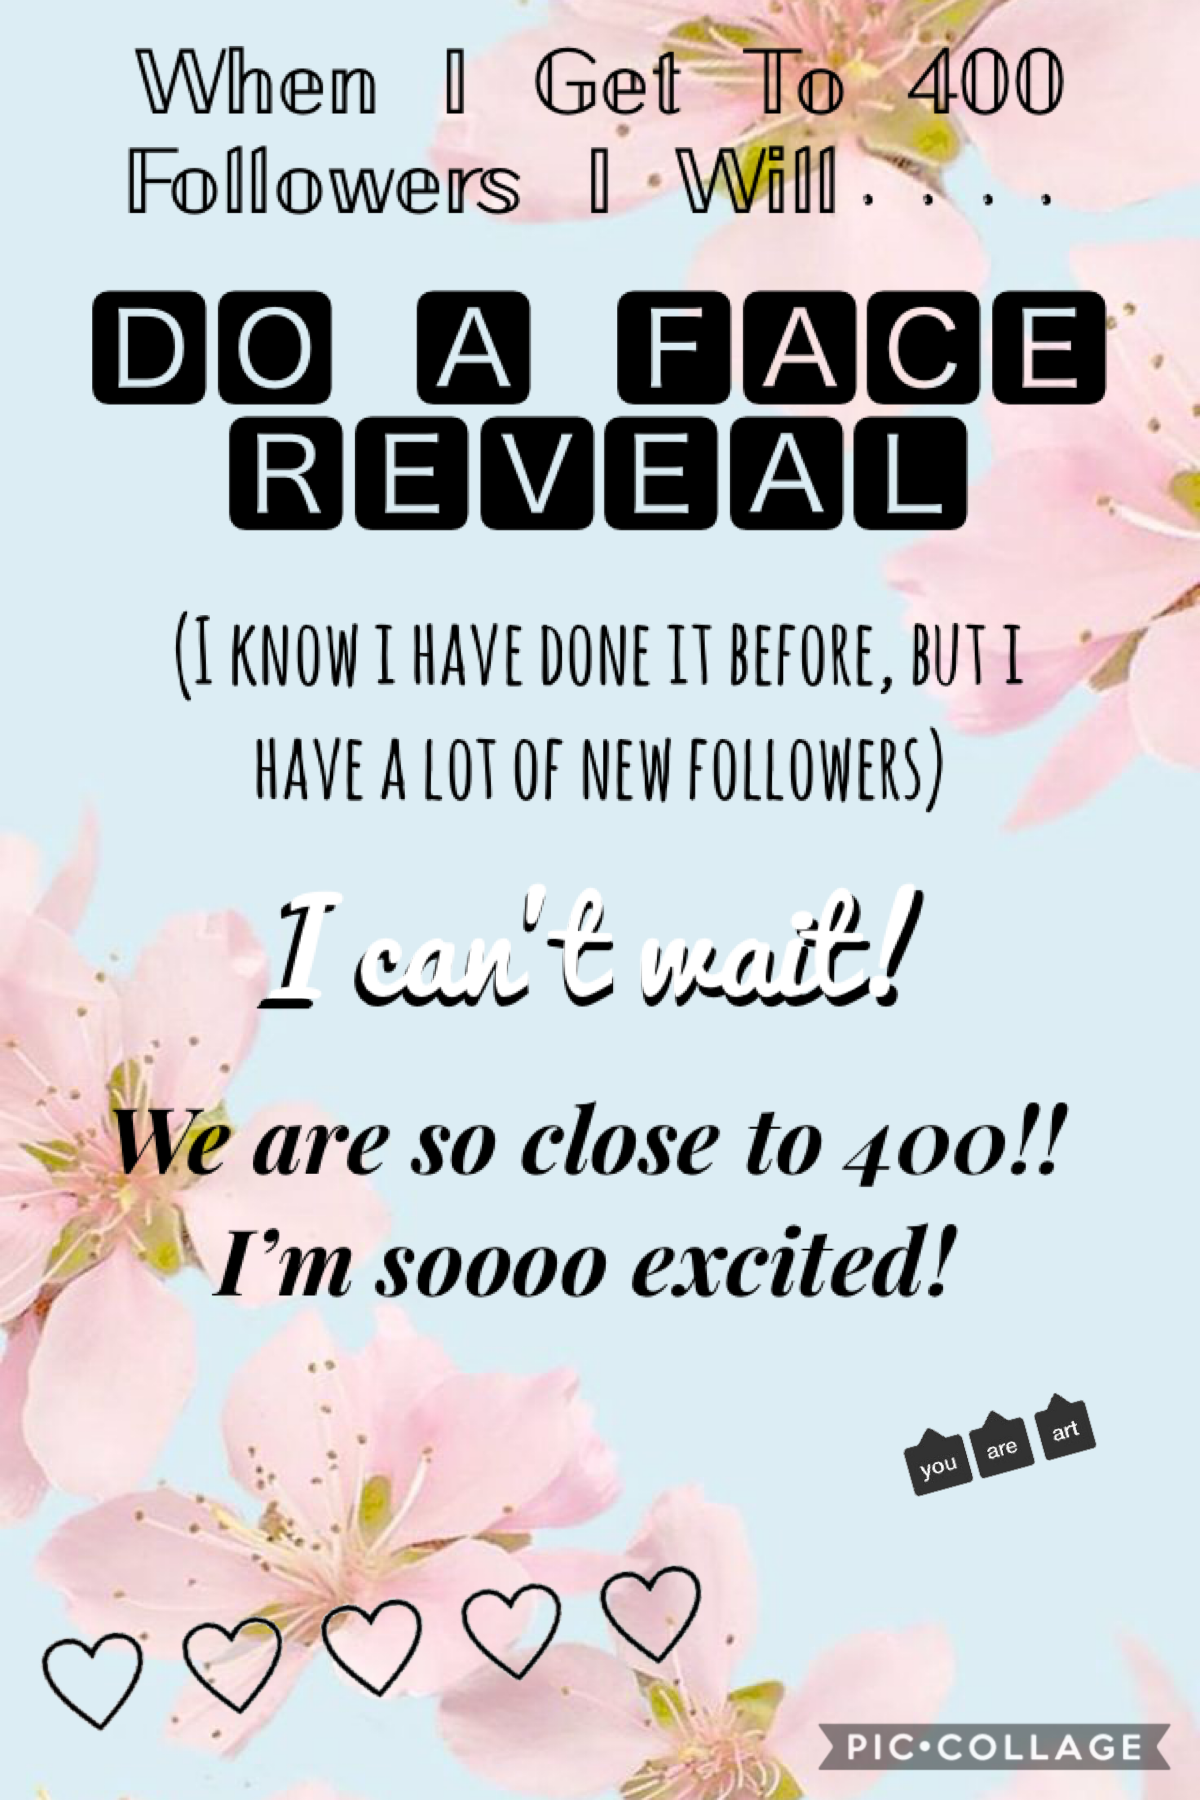 💖🌺Tap🌺💖
I’m so excited!!
Face Reveal when I get 400!!!